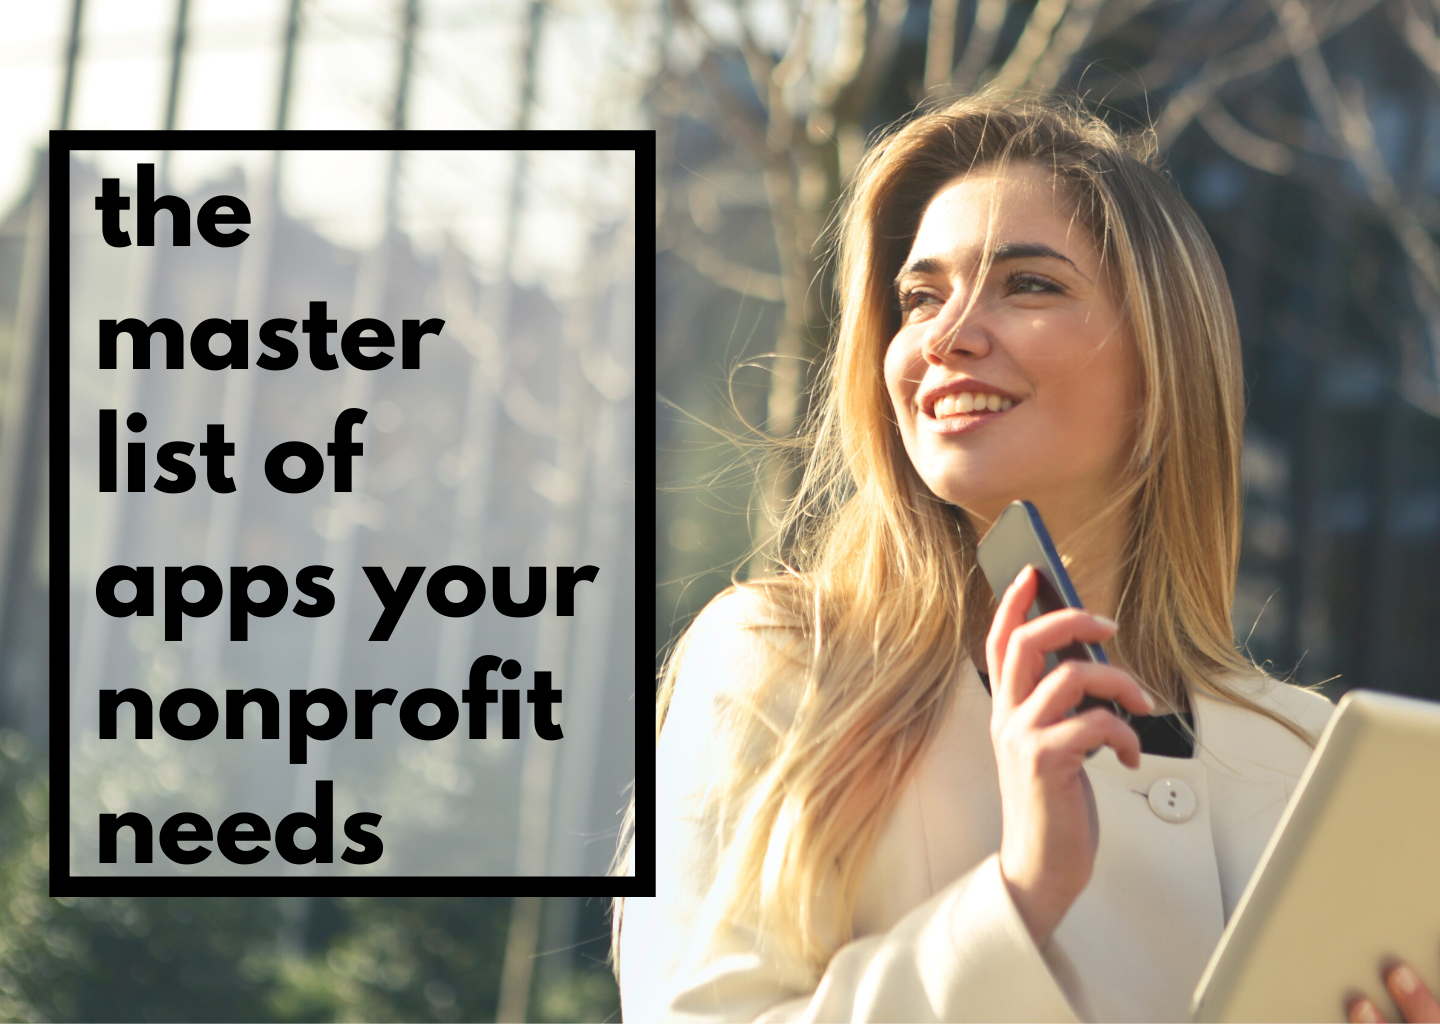 The Master List of Apps Your Nonprofit Needs